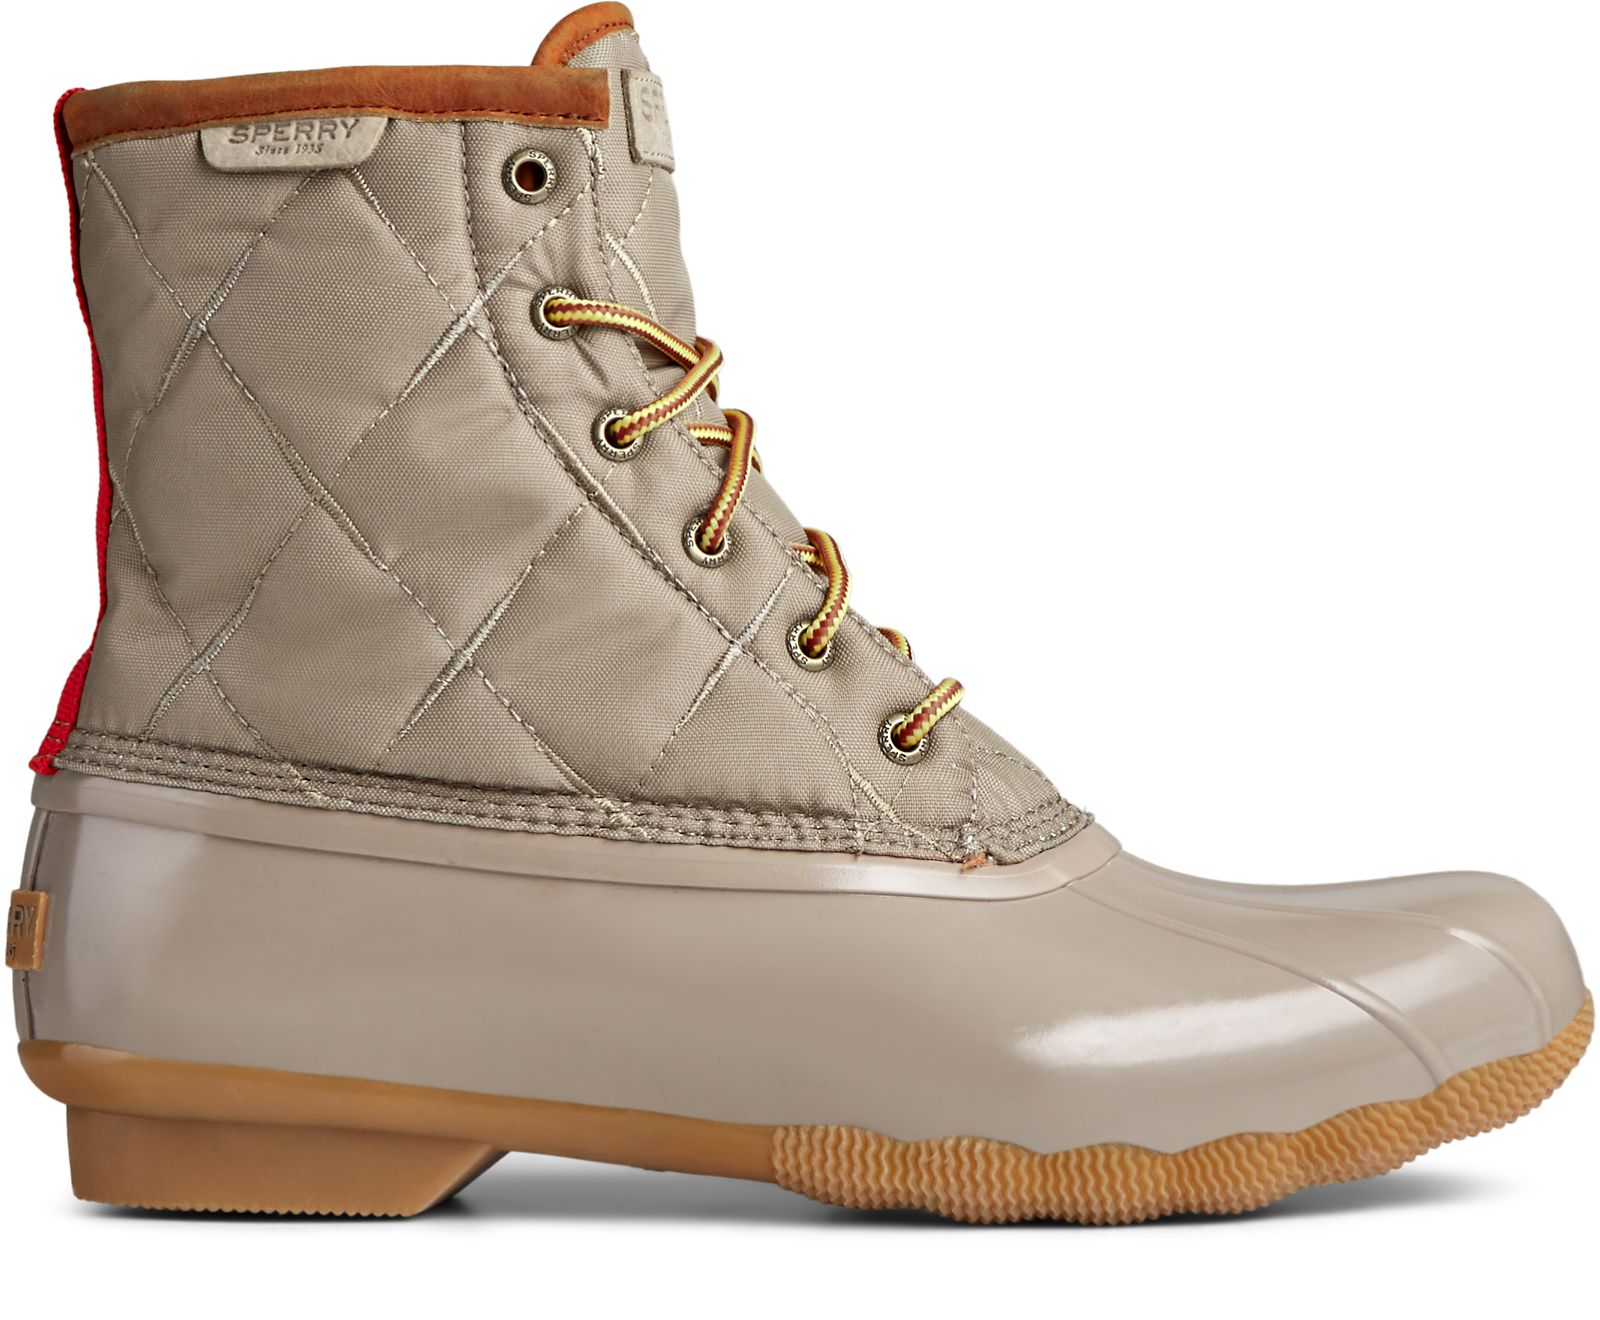 Men's Saltwater Nylon Duck Boot - Taupe - Click Image to Close